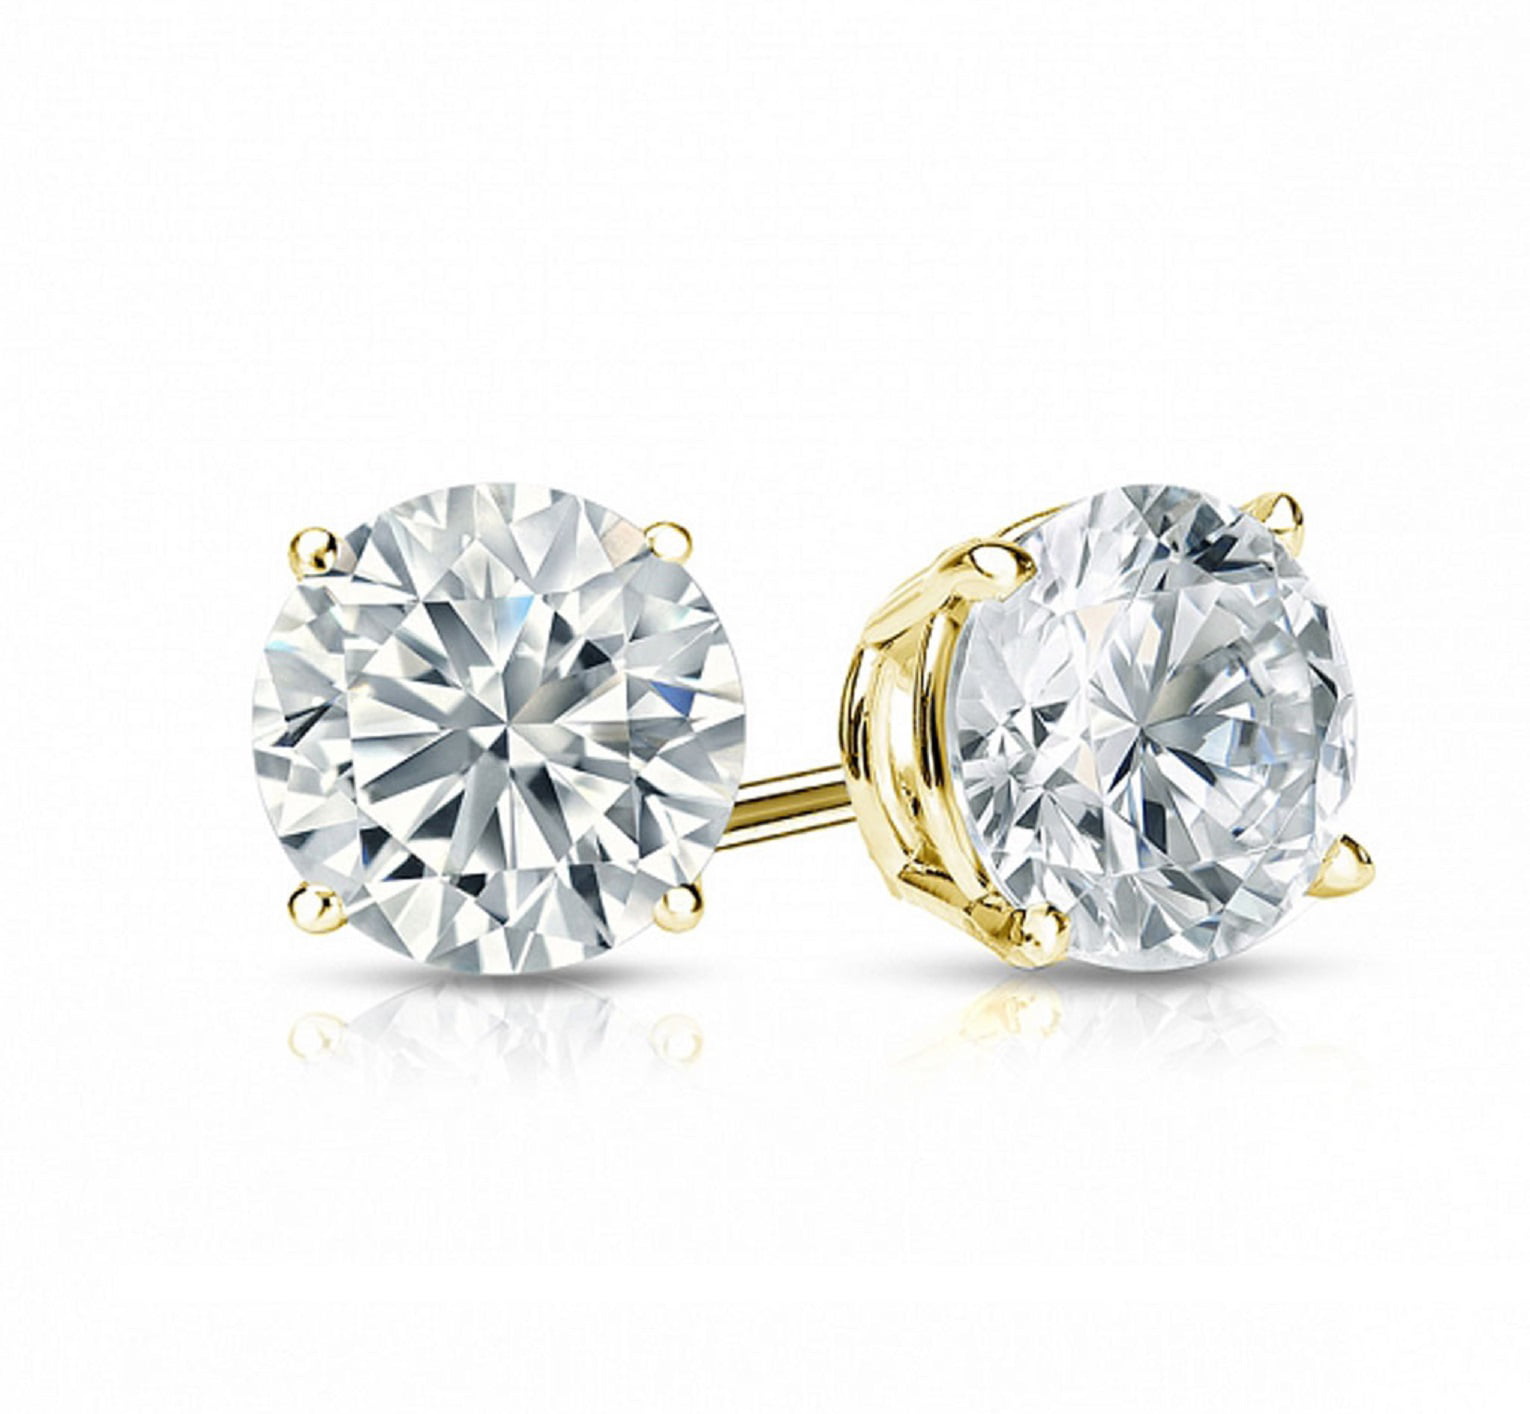 Clara Pucci 3.90 CT Princess Brilliant Cut Solitaire Stud Earrings in 14k Yellow Gold Push Back